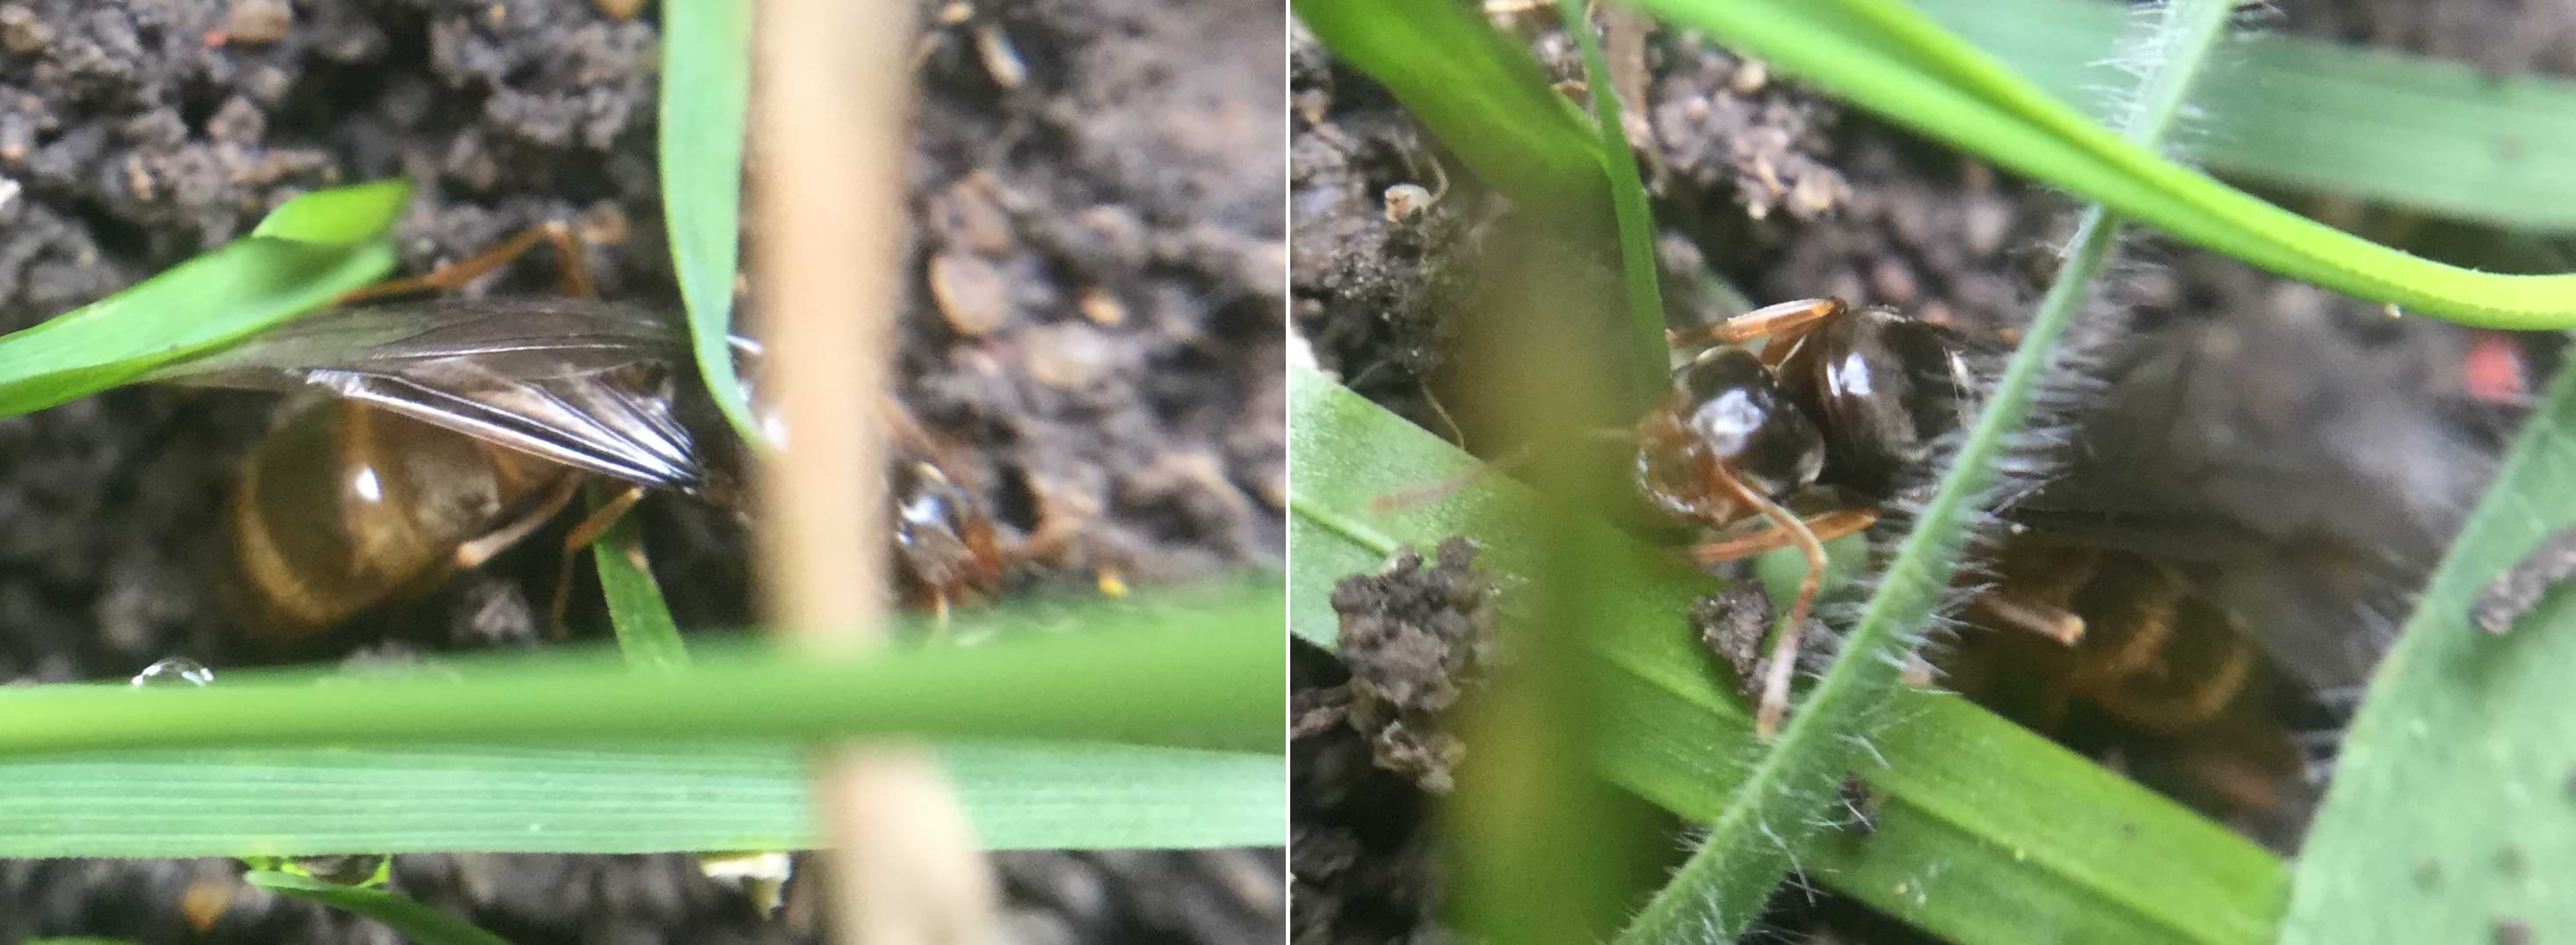 Two photos of a winged insect with a banded red abdomen. The photos are obscured by grass and don't give a clear view of the bug.